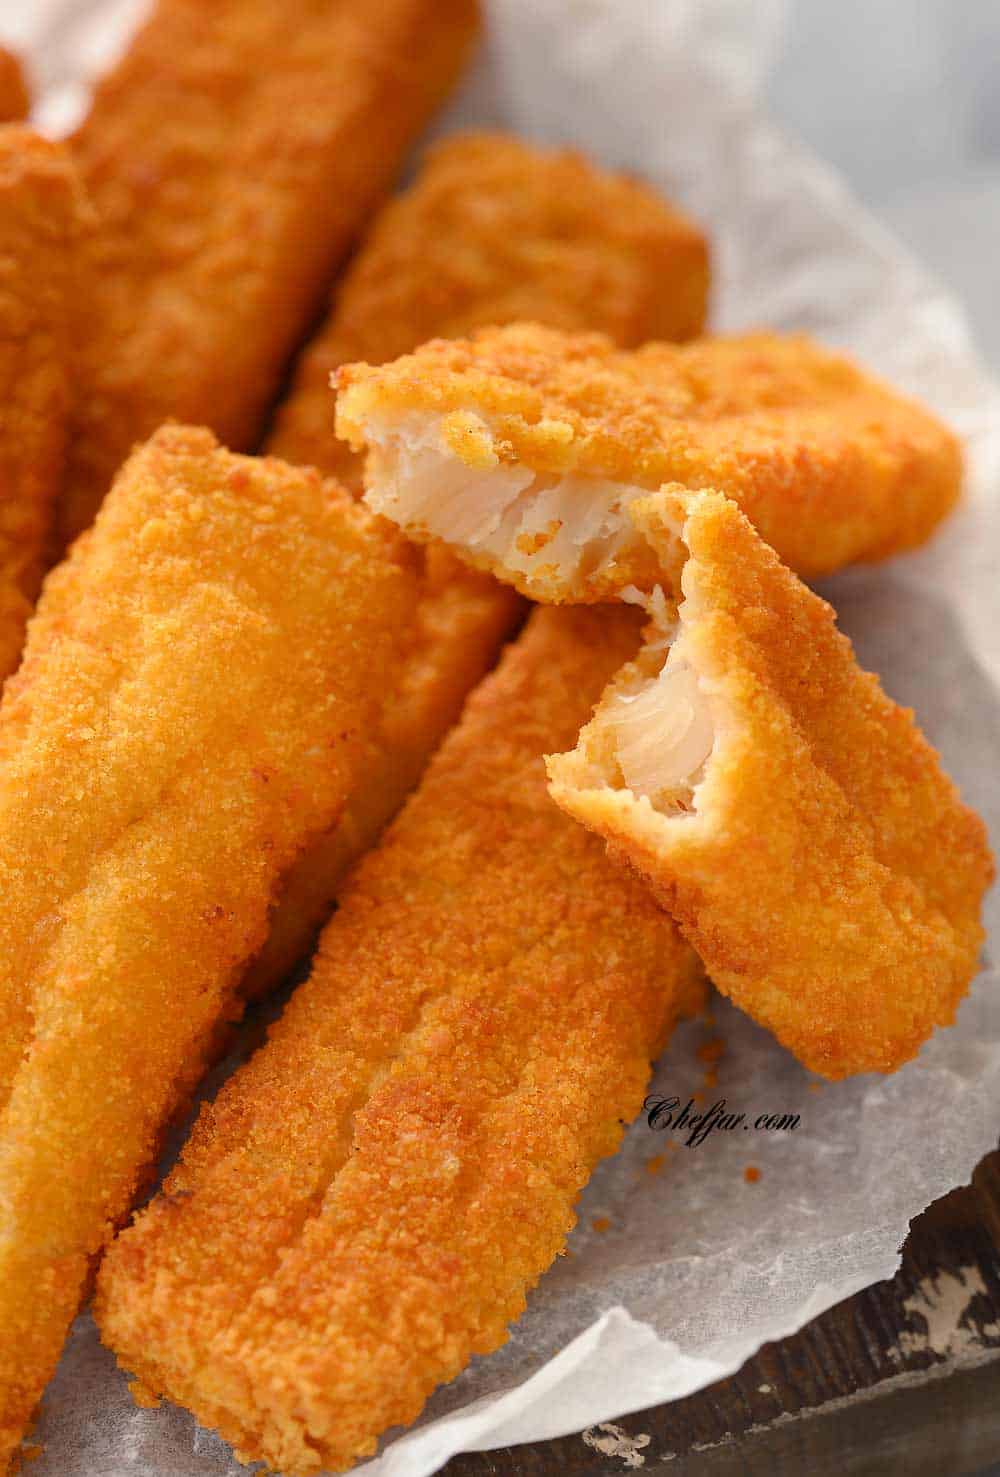 Air Fryer Frozen Fish stick / These Frozen Fish Sticks are so easy to make in 7 minutes! They are crunchy and delicious and ready in no time! #fishsticks #airfryerrecipes